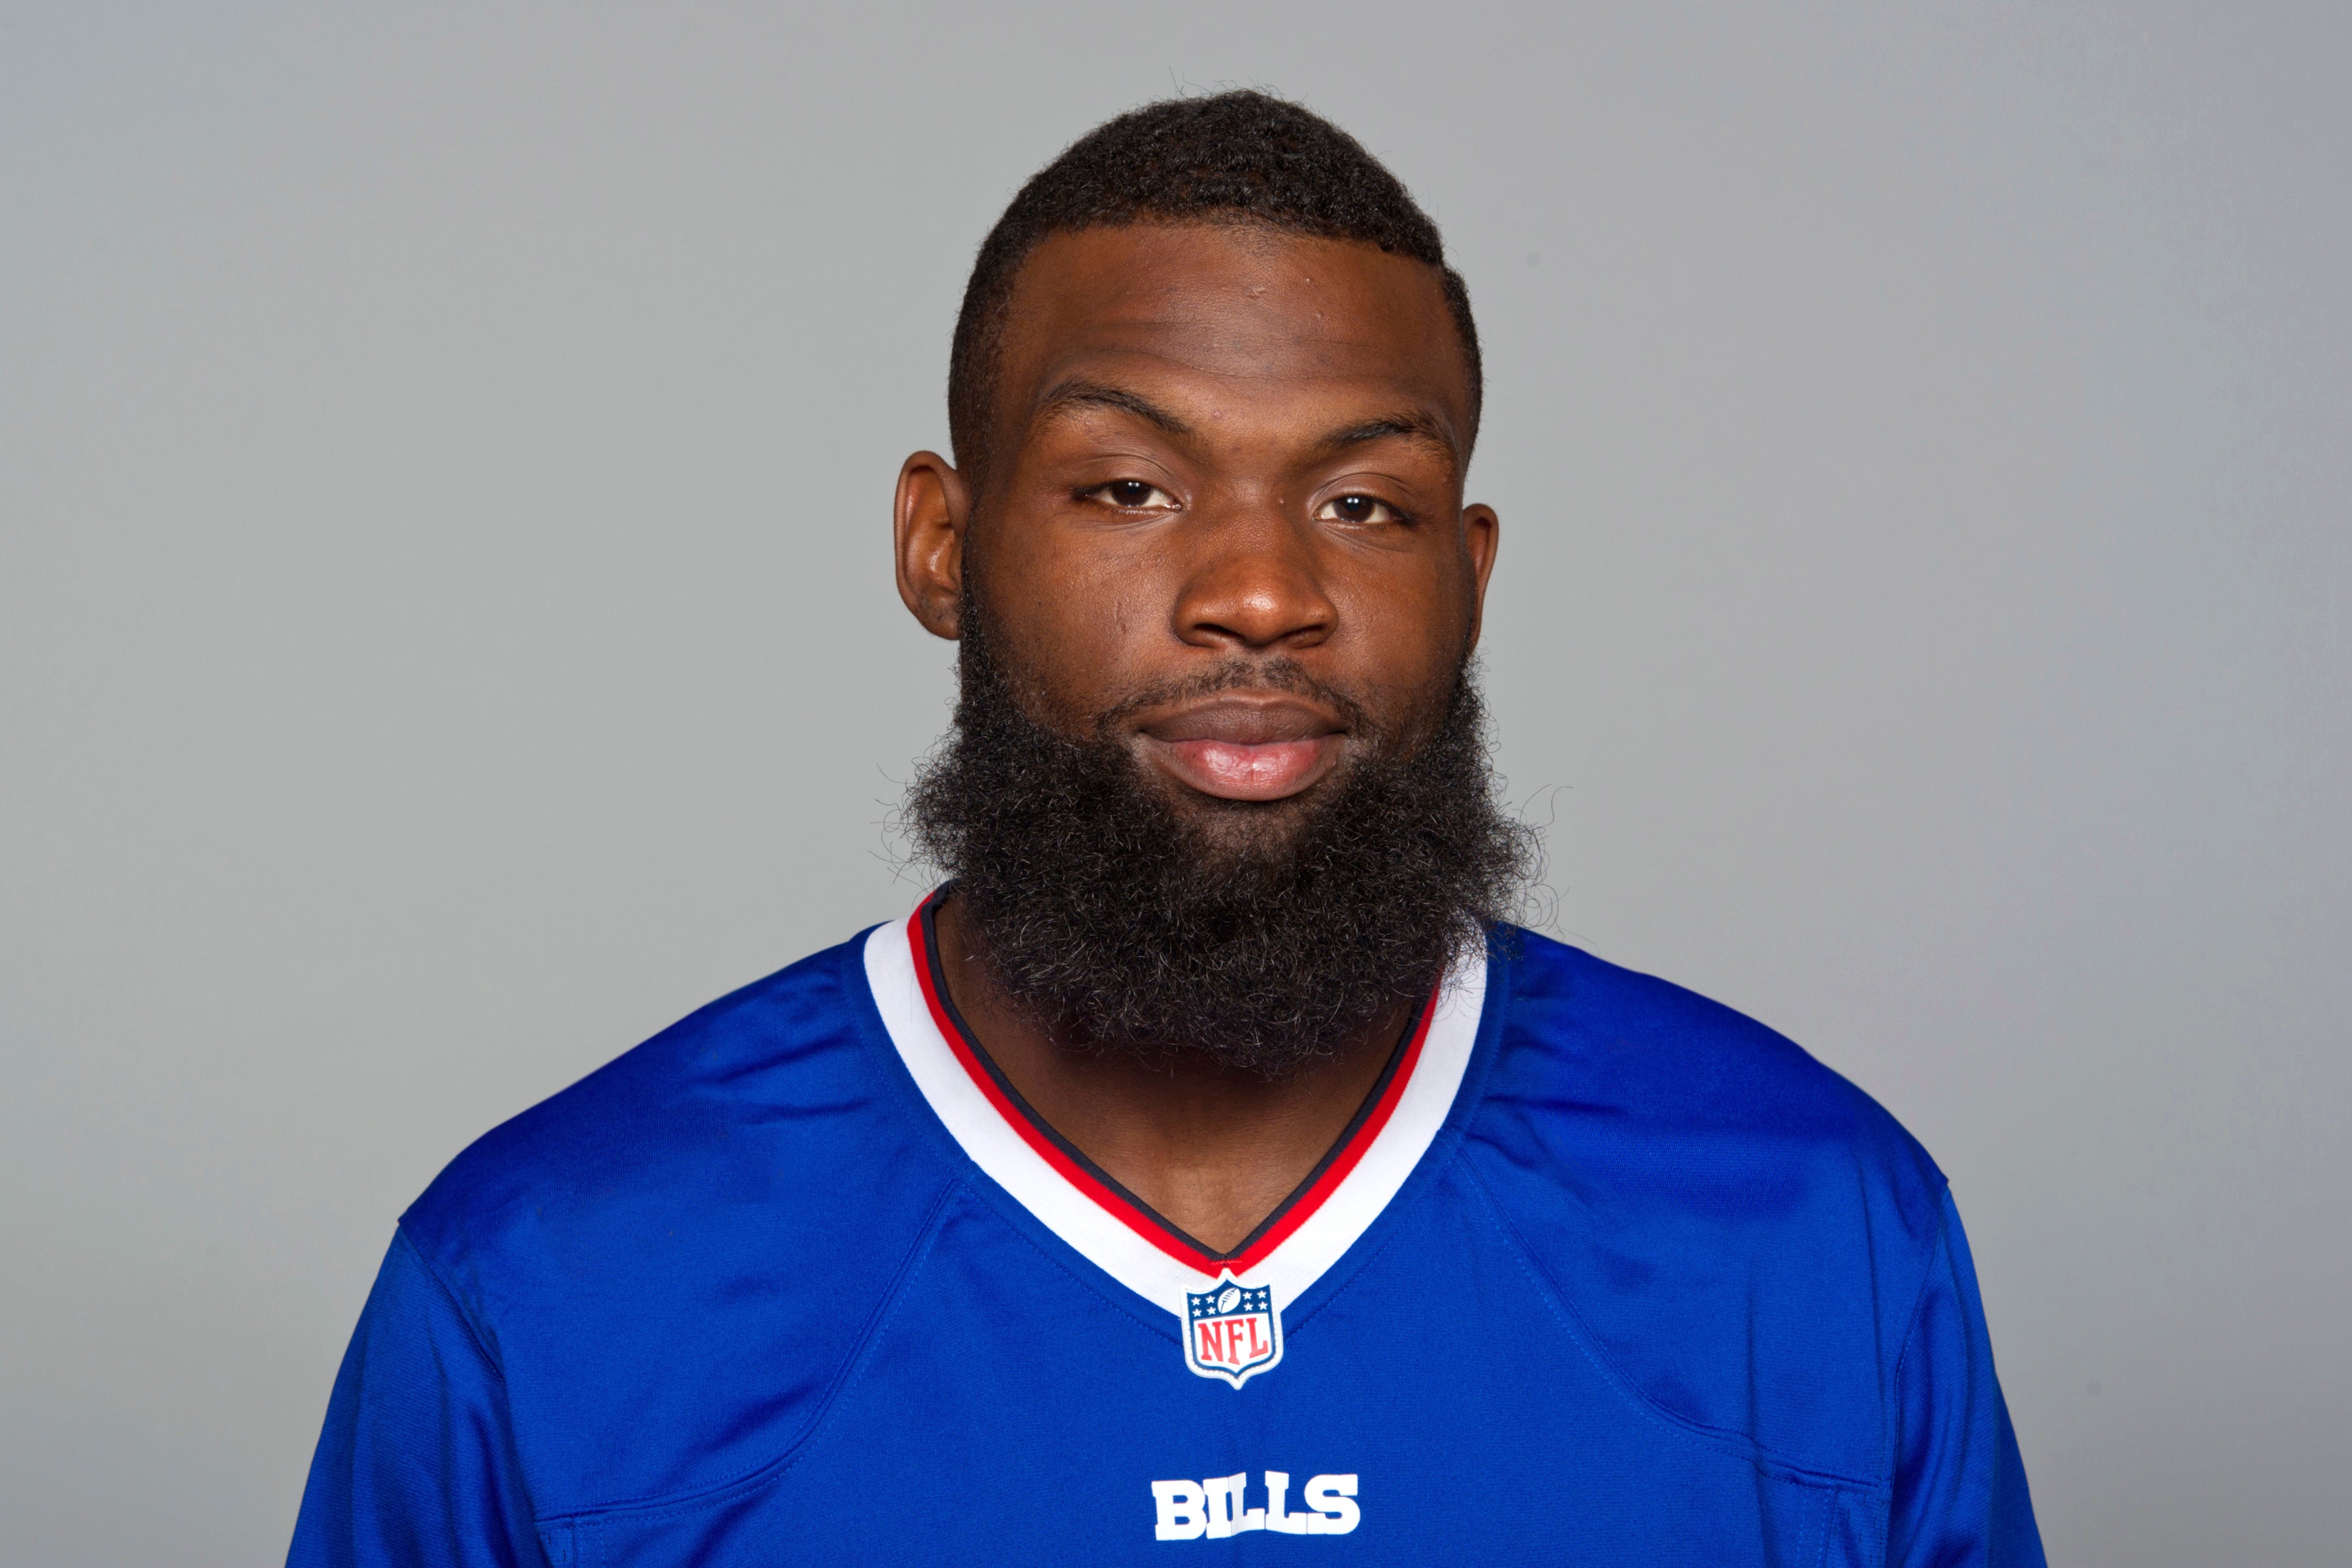 Ex-NFL player Mike Williams' cause of death revealed | The Independent